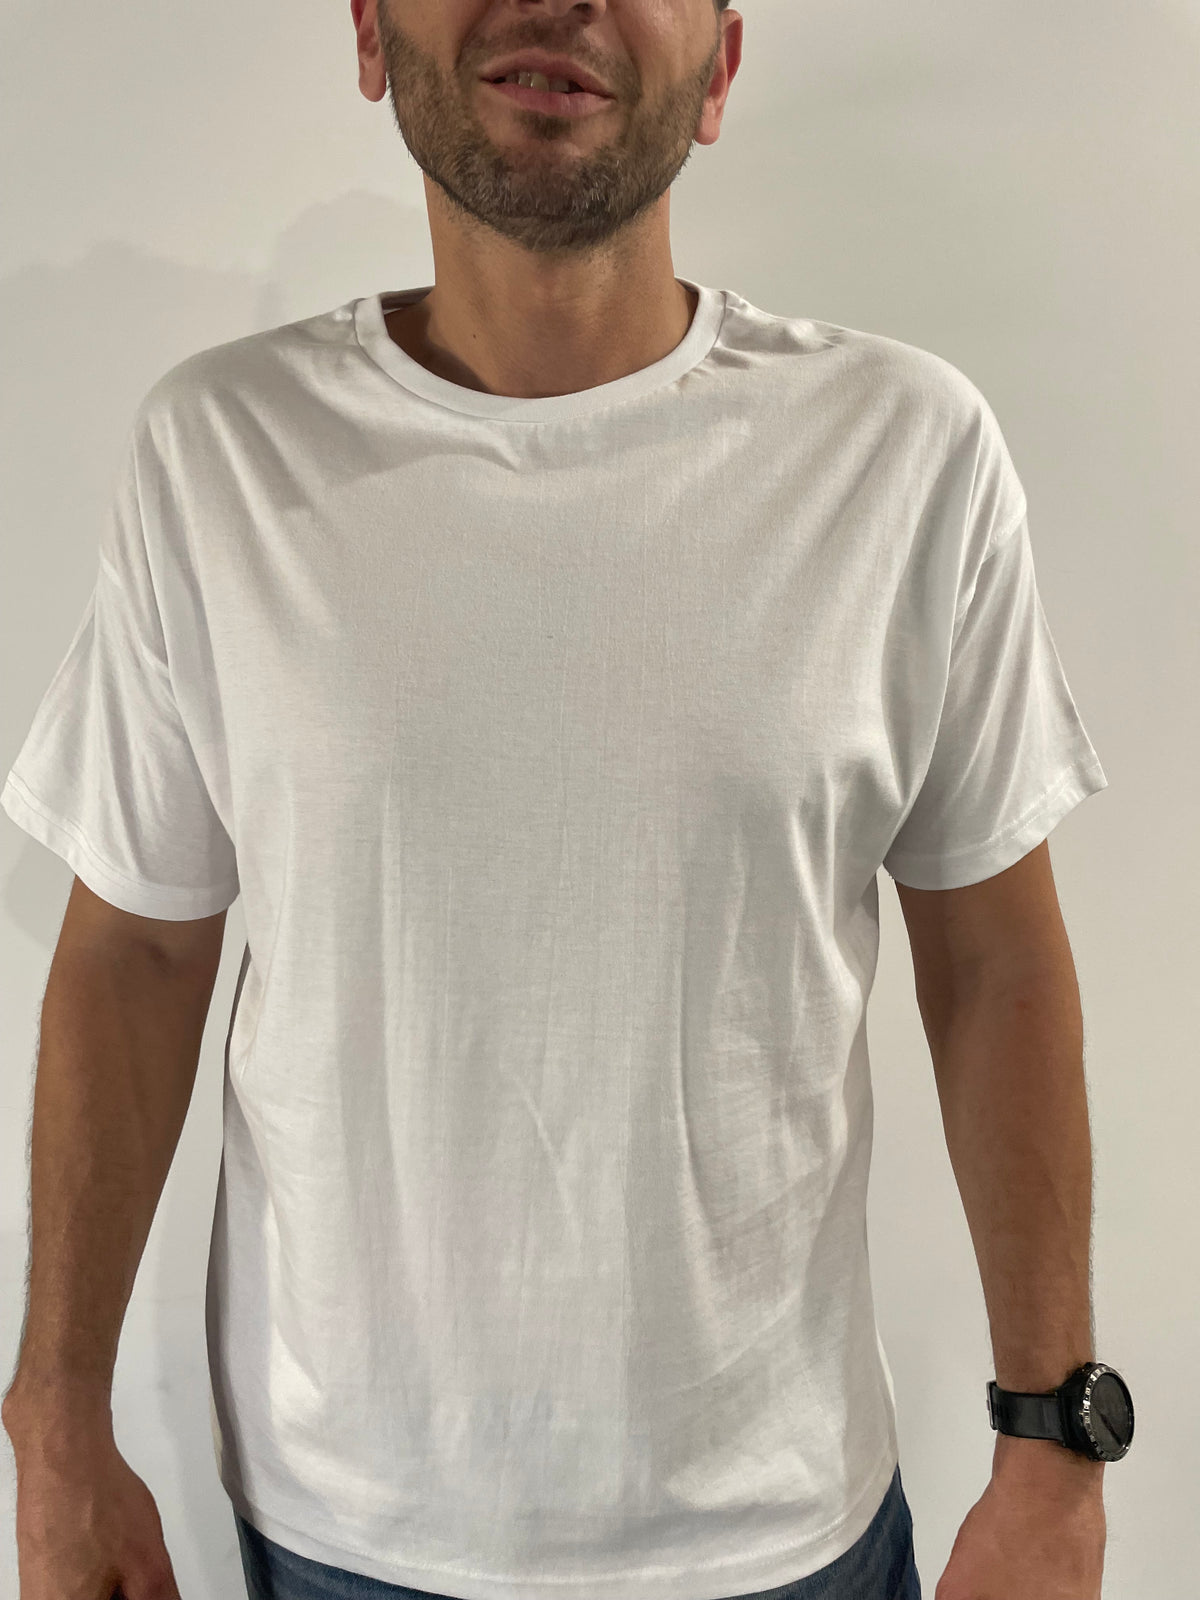 The Crew Tee- Oversized Fit